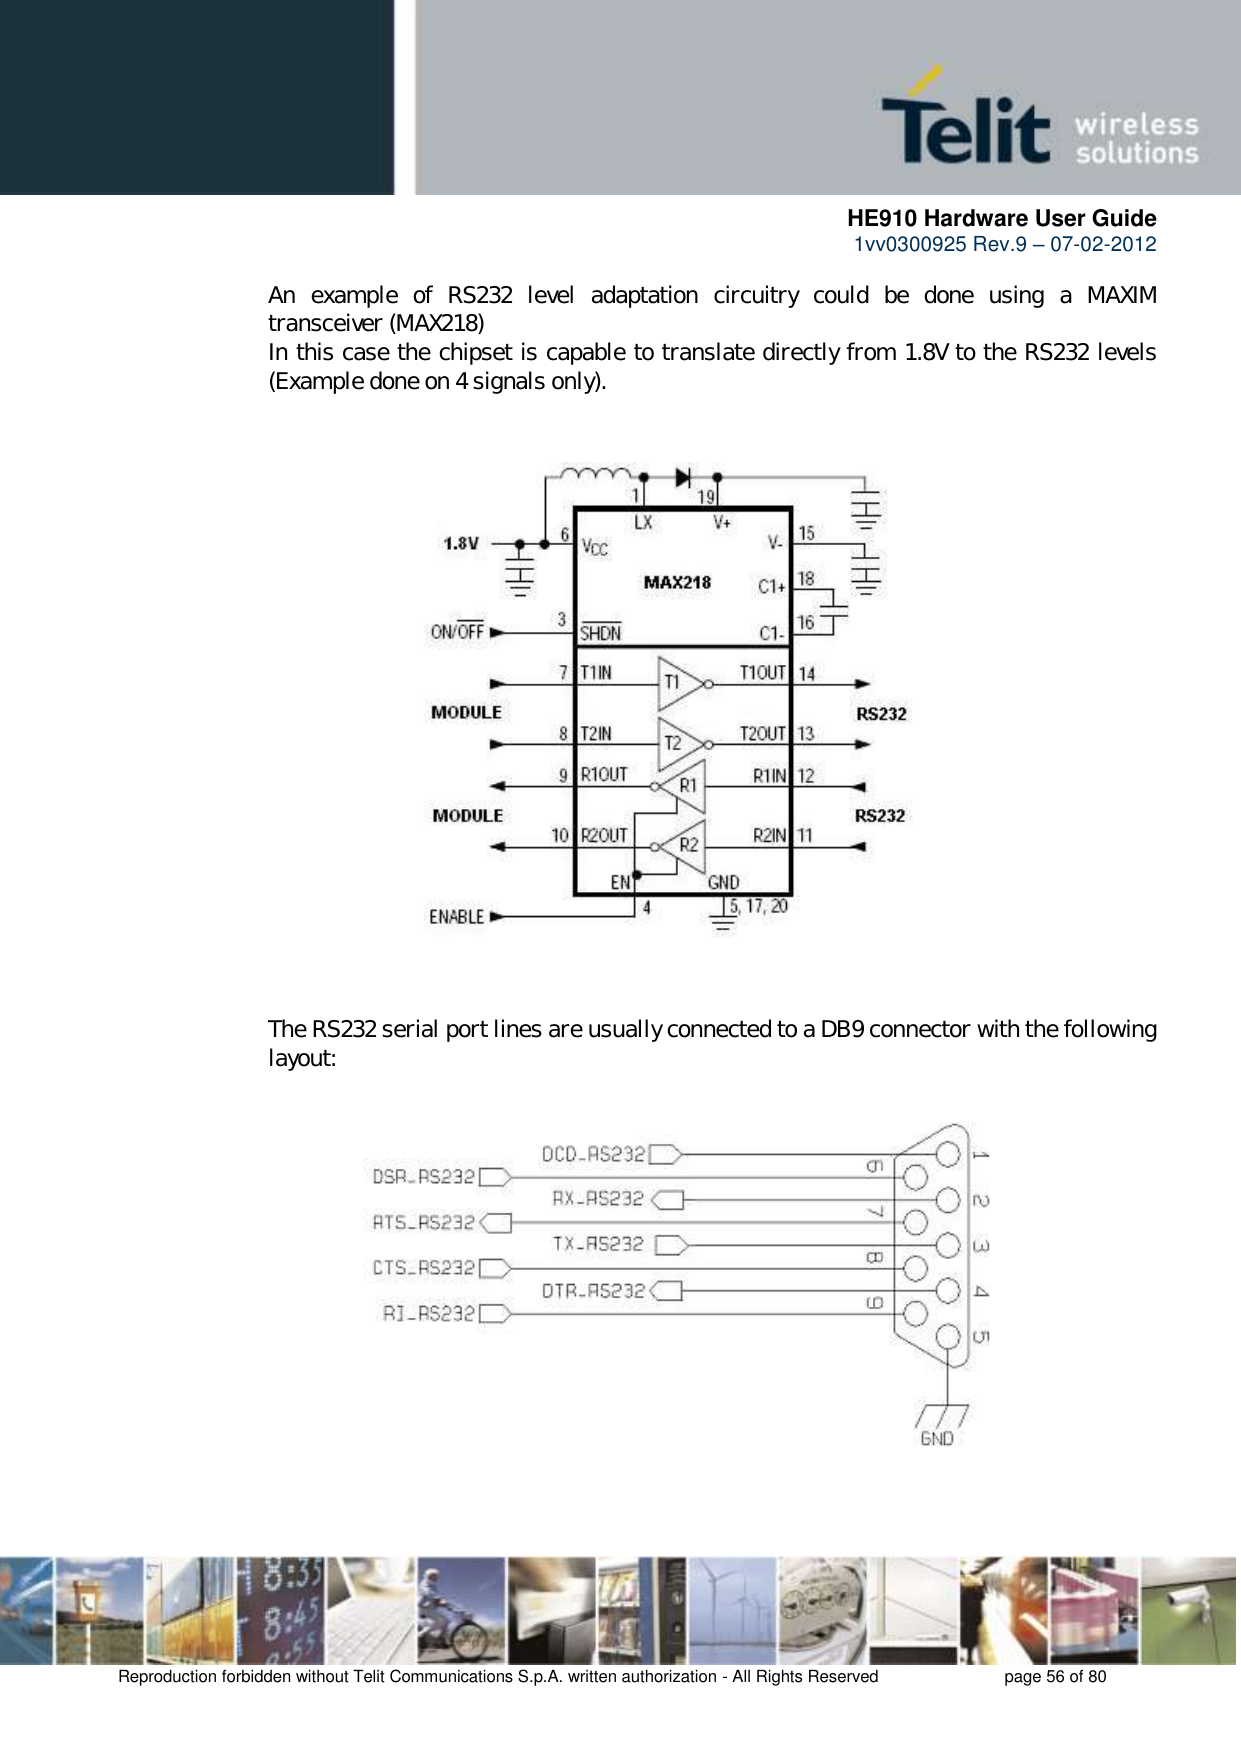      HE910 Hardware User Guide 1vv0300925 Rev.9 – 07-02-2012    Reproduction forbidden without Telit Communications S.p.A. written authorization - All Rights Reserved    page 56 of 80  An  example  of  RS232  level  adaptation  circuitry  could  be  done  using  a  MAXIM transceiver (MAX218)  In this case the chipset is capable to translate directly from 1.8V to the RS232 levels (Example done on 4 signals only).                       The RS232 serial port lines are usually connected to a DB9 connector with the following layout:              